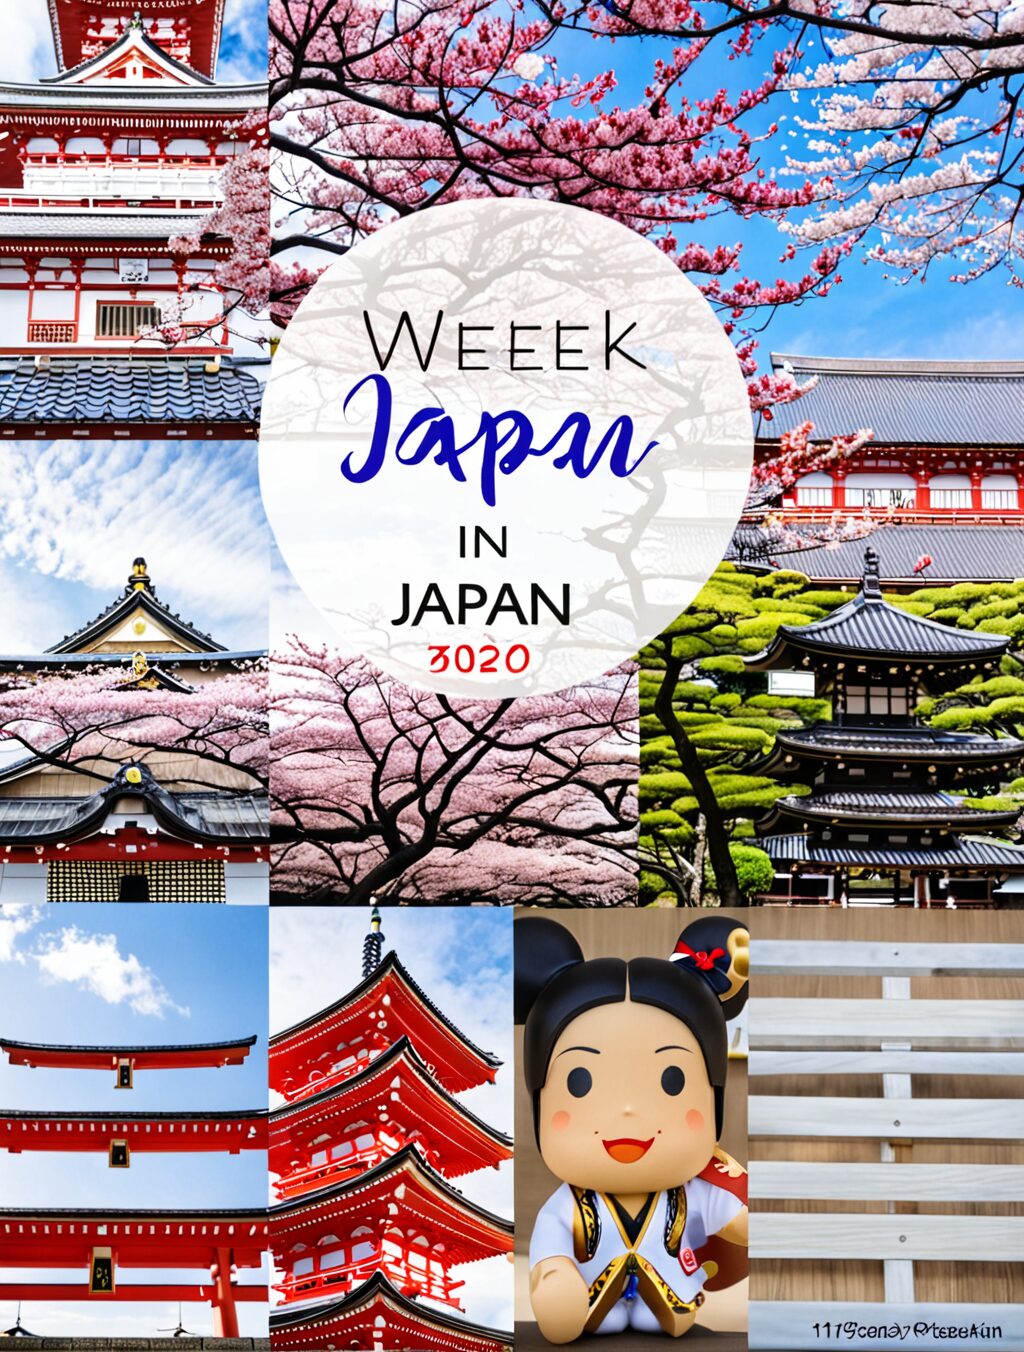 one week in japan itinerary